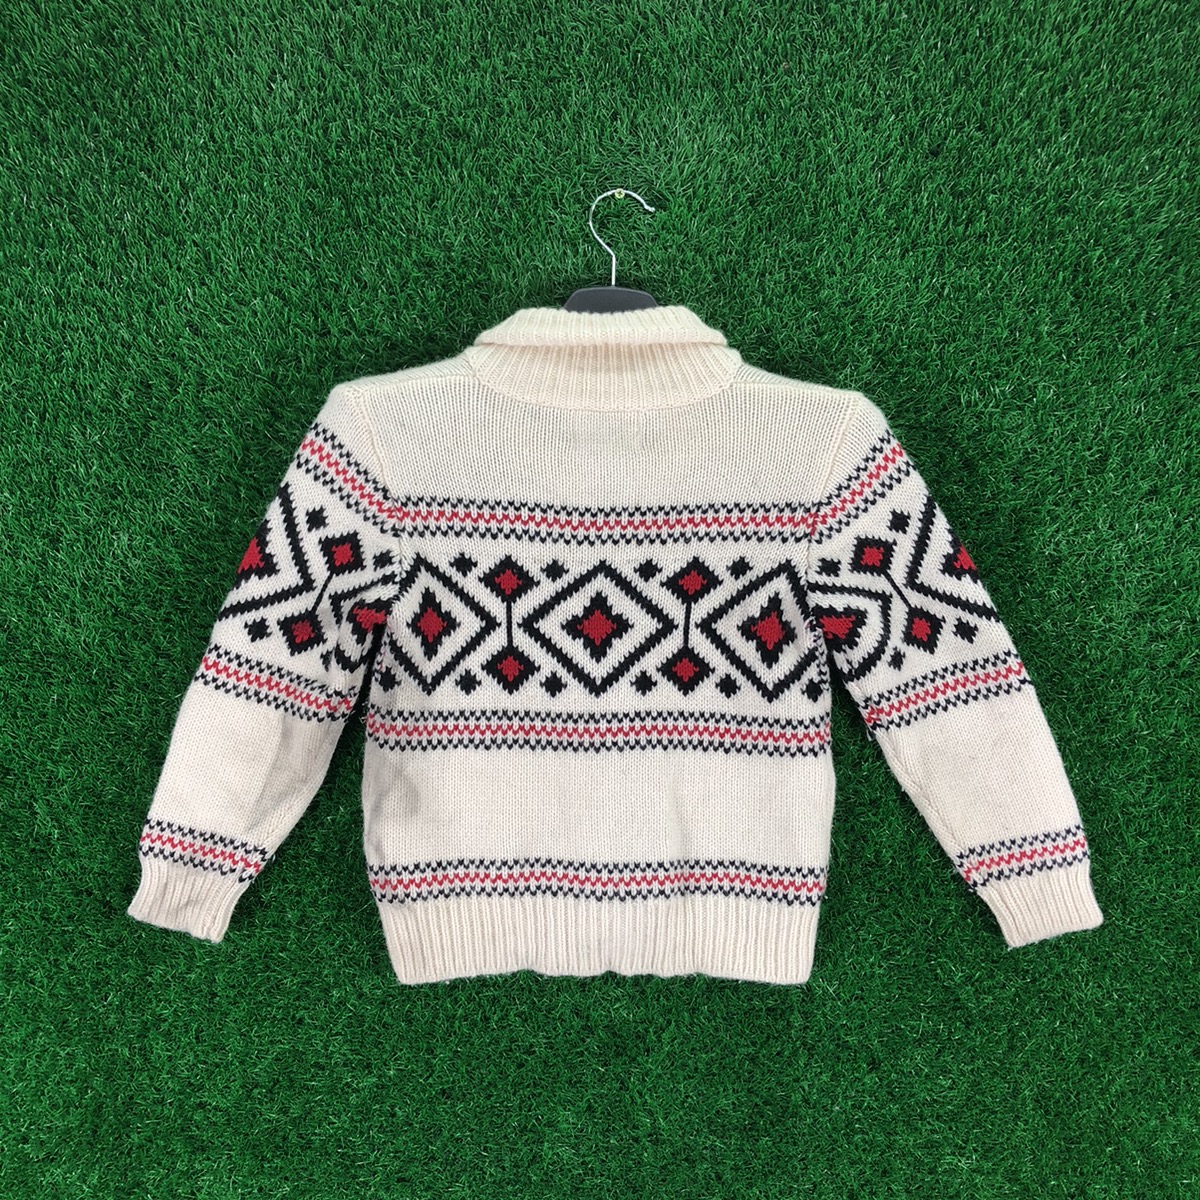 Coloured Cable Knit Sweater - Green Label Knit Cowichan Shawl Collar for Kid - 4